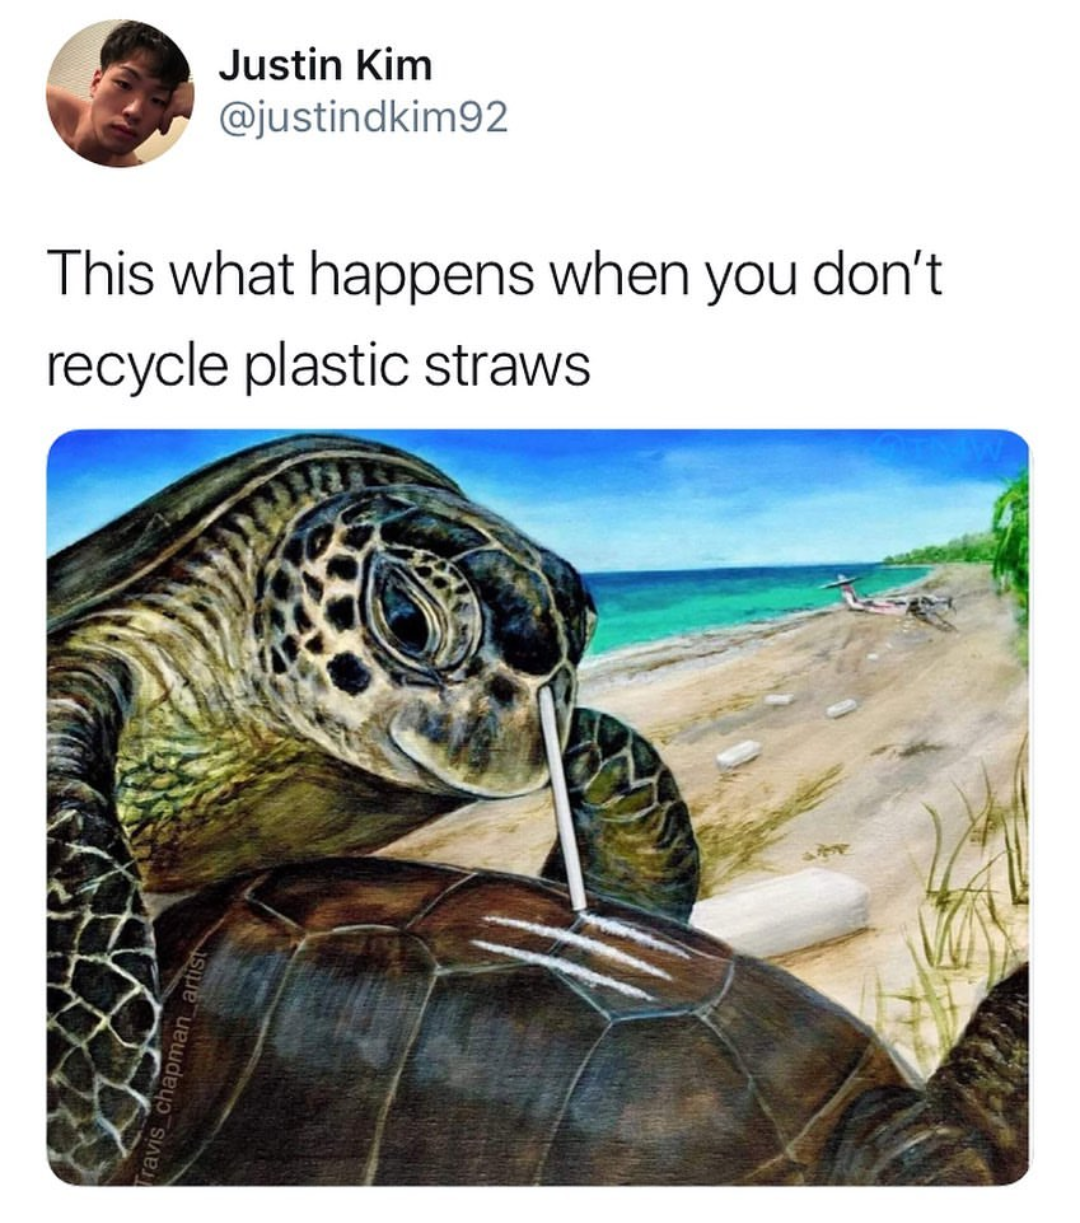 turtle and plastic straw - Justin Kim This what happens when you don't recycle plastic straws as chapman_